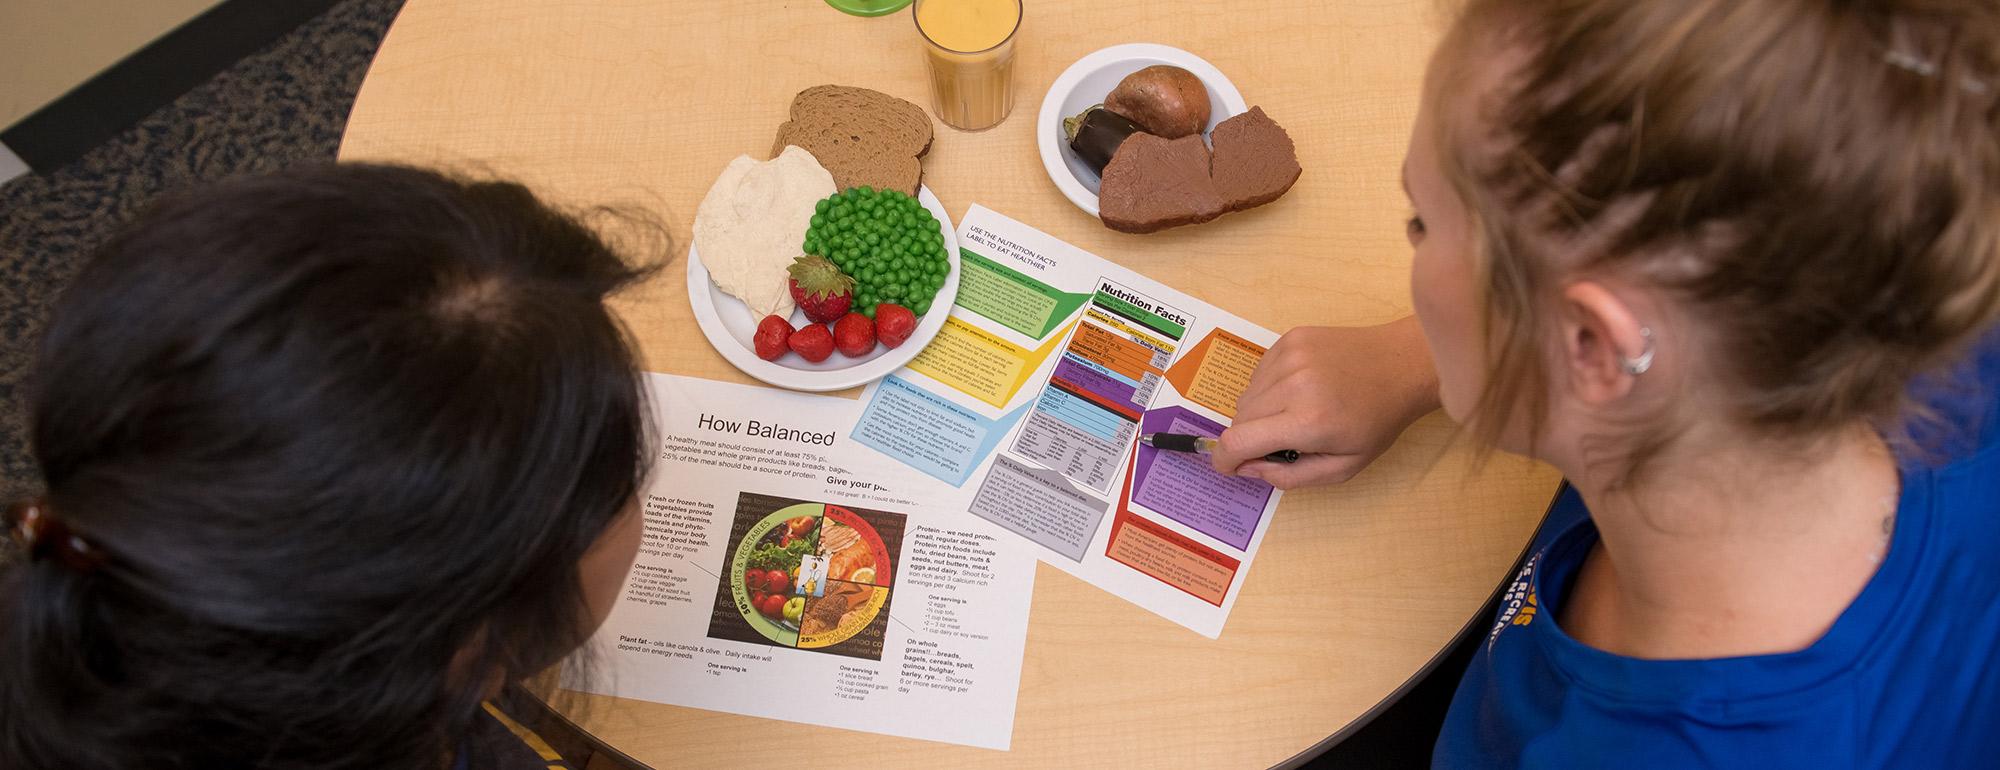 Two students look at a nutrition plan on a table with a sample meal on it